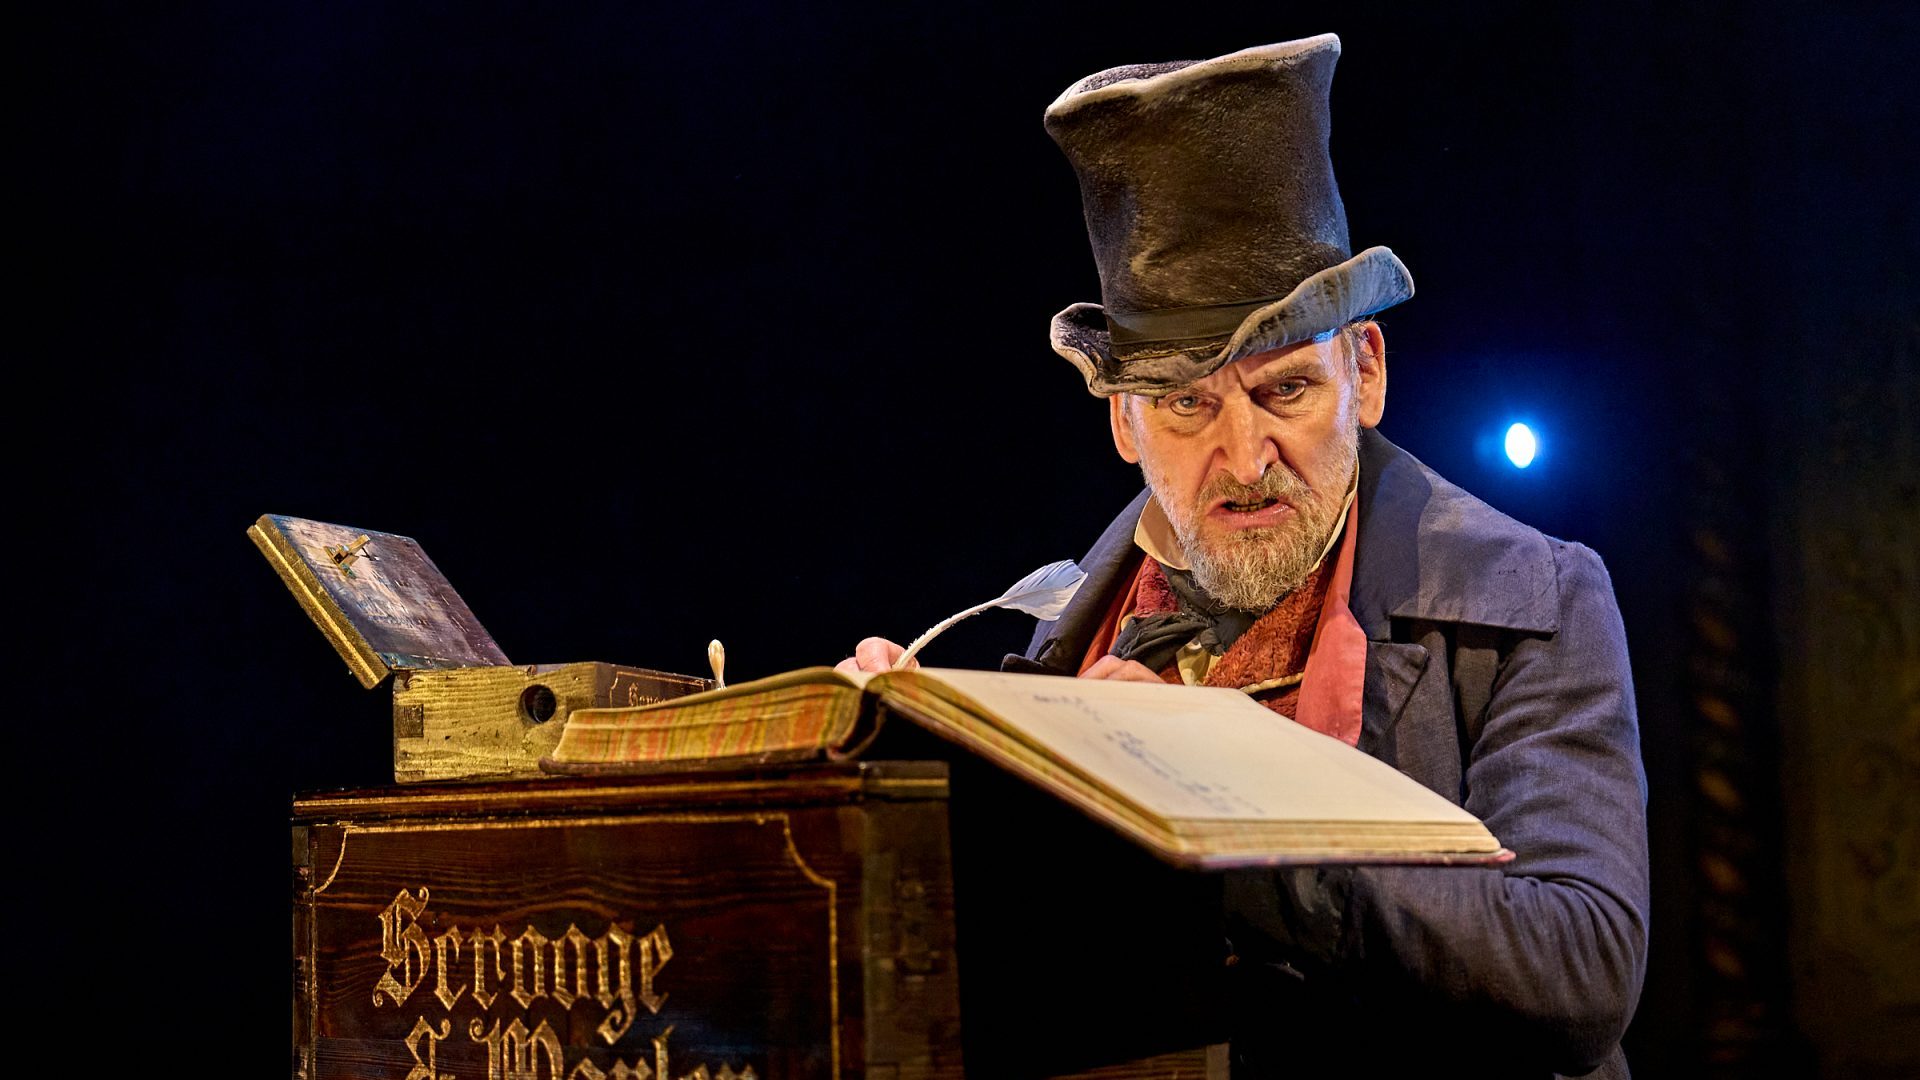 Christopher Eccleston as Ebenezer Scrooge in A Christmas Carol at The Old Vic. Photo by Manuel Harlan